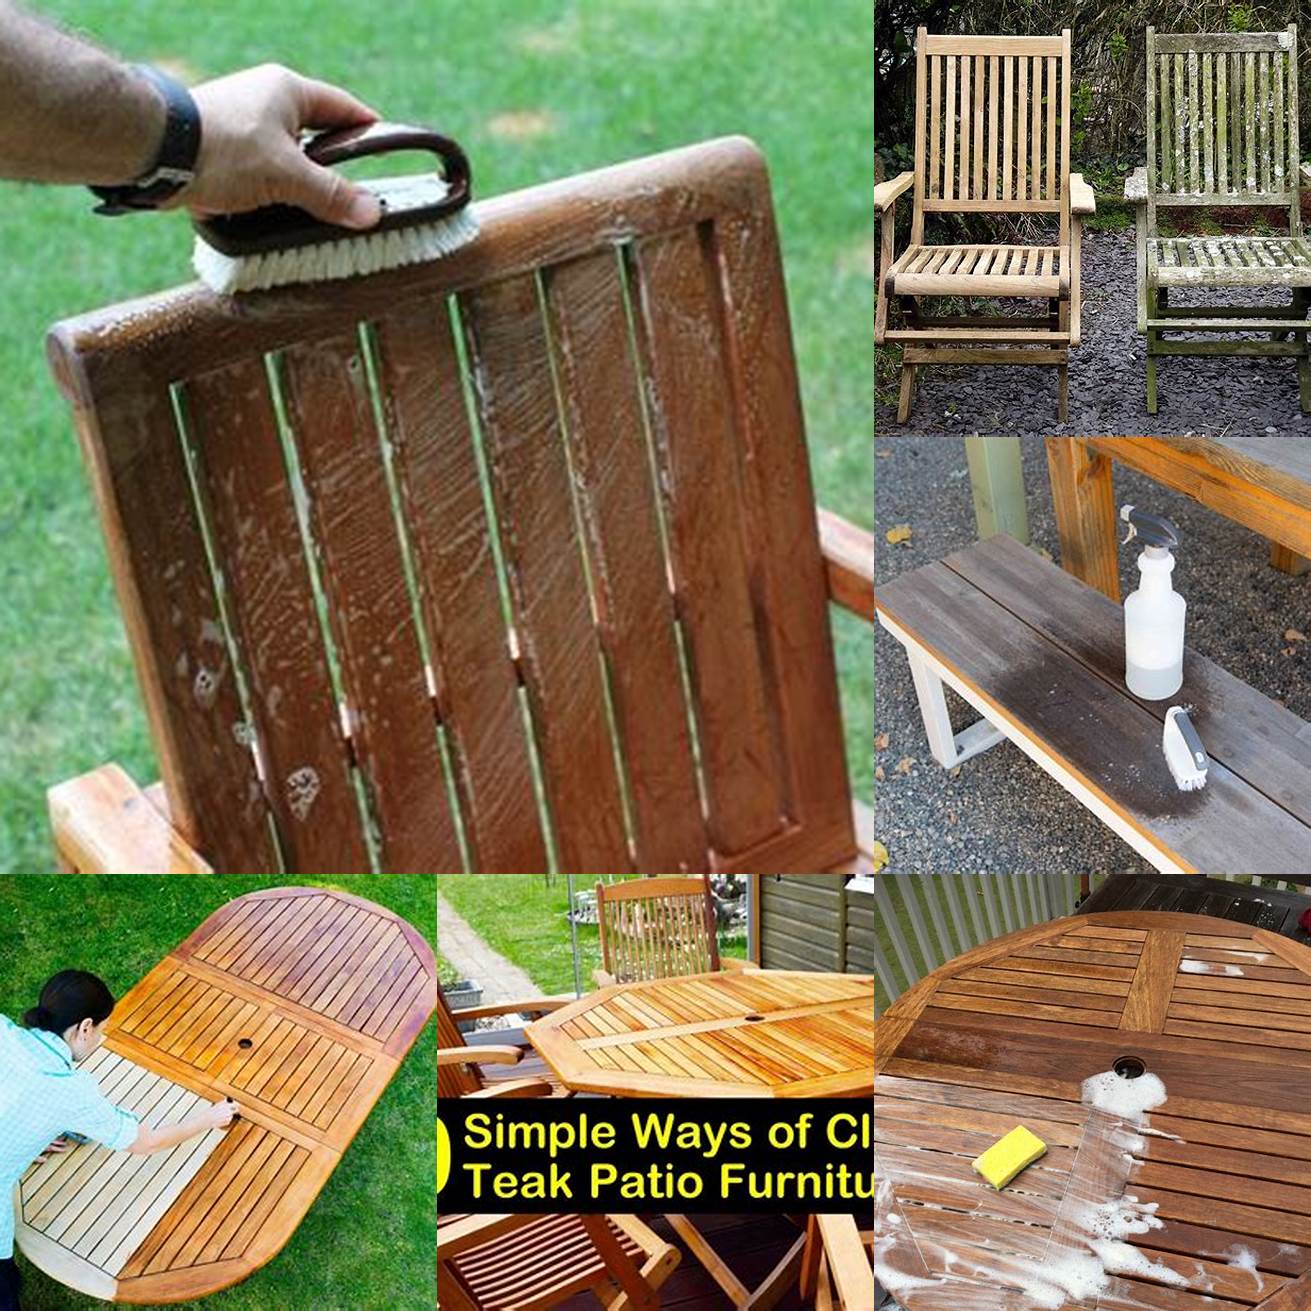 Cleaning your teak furniture